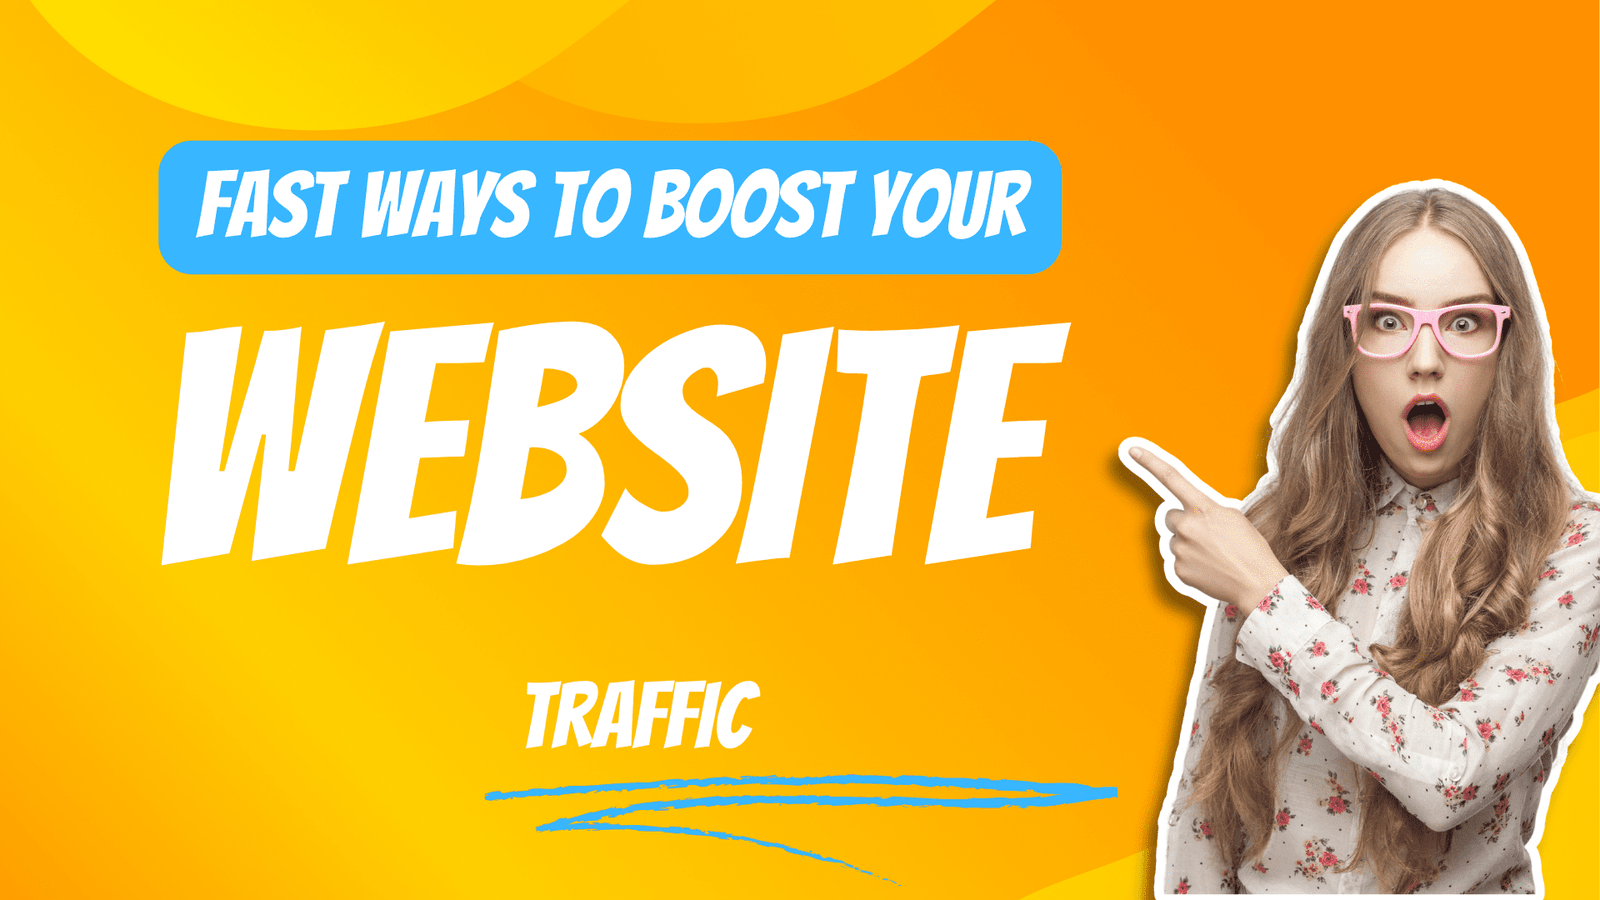 Learn to Increase Website Traffic with simple step